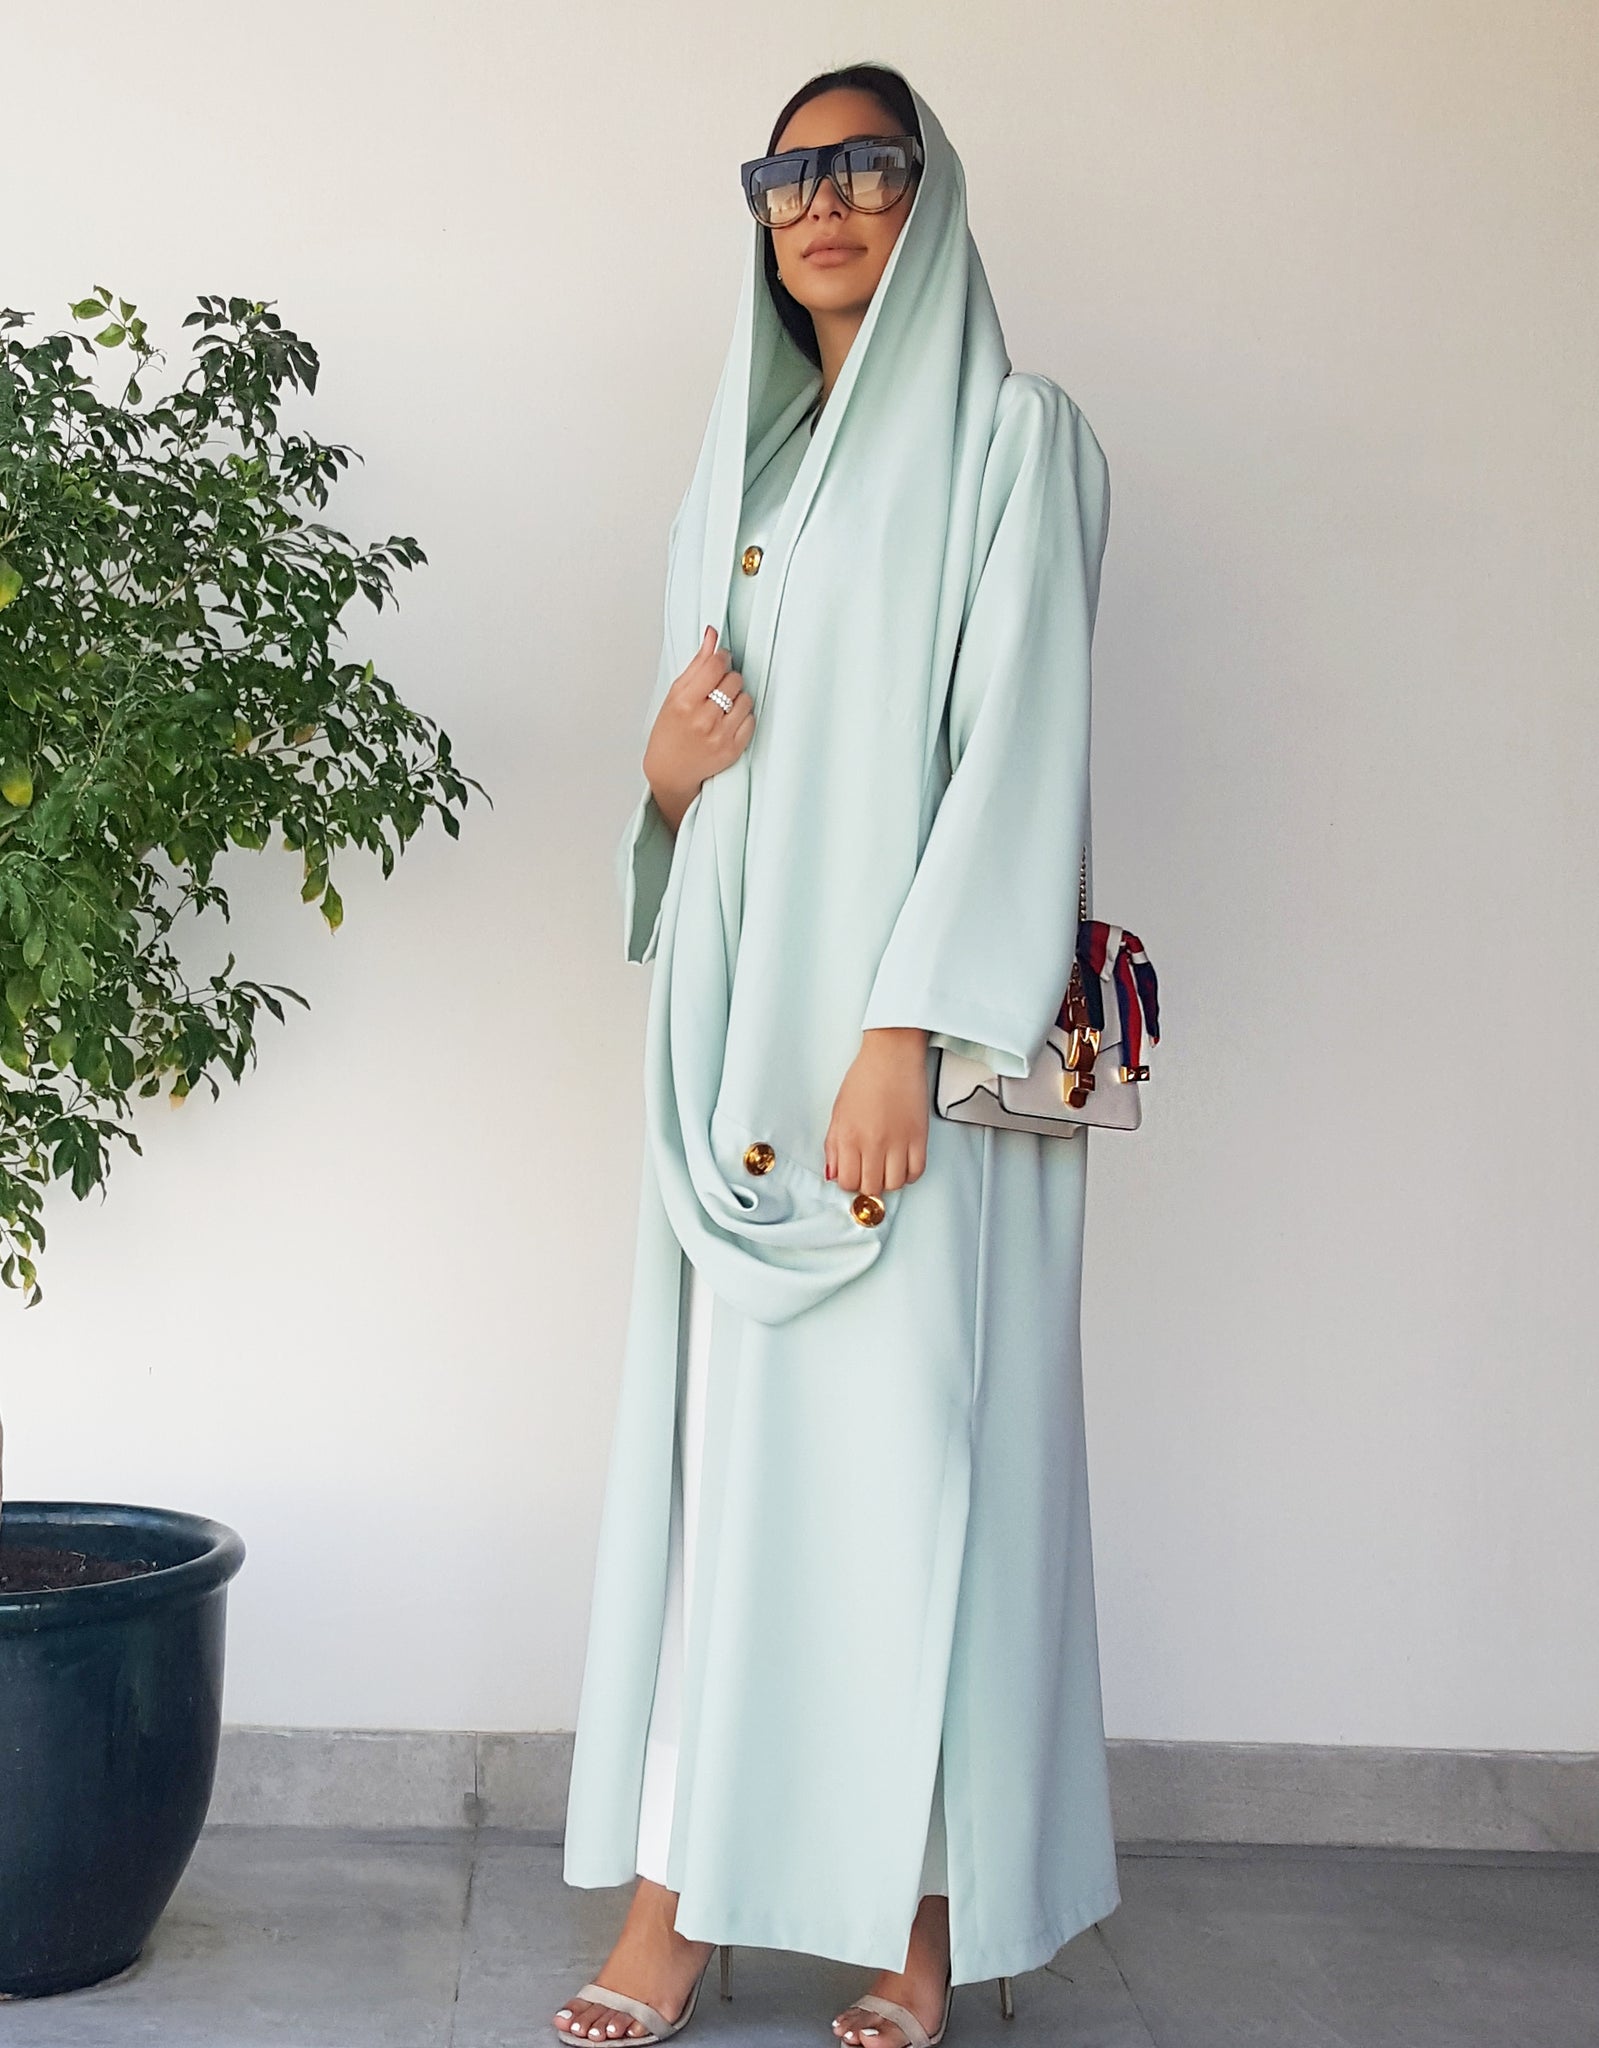 SS18 TIFFANY BLUE CREPE ABAYA WITH MATT GOLD BUTTON DETAILING & SNOOD